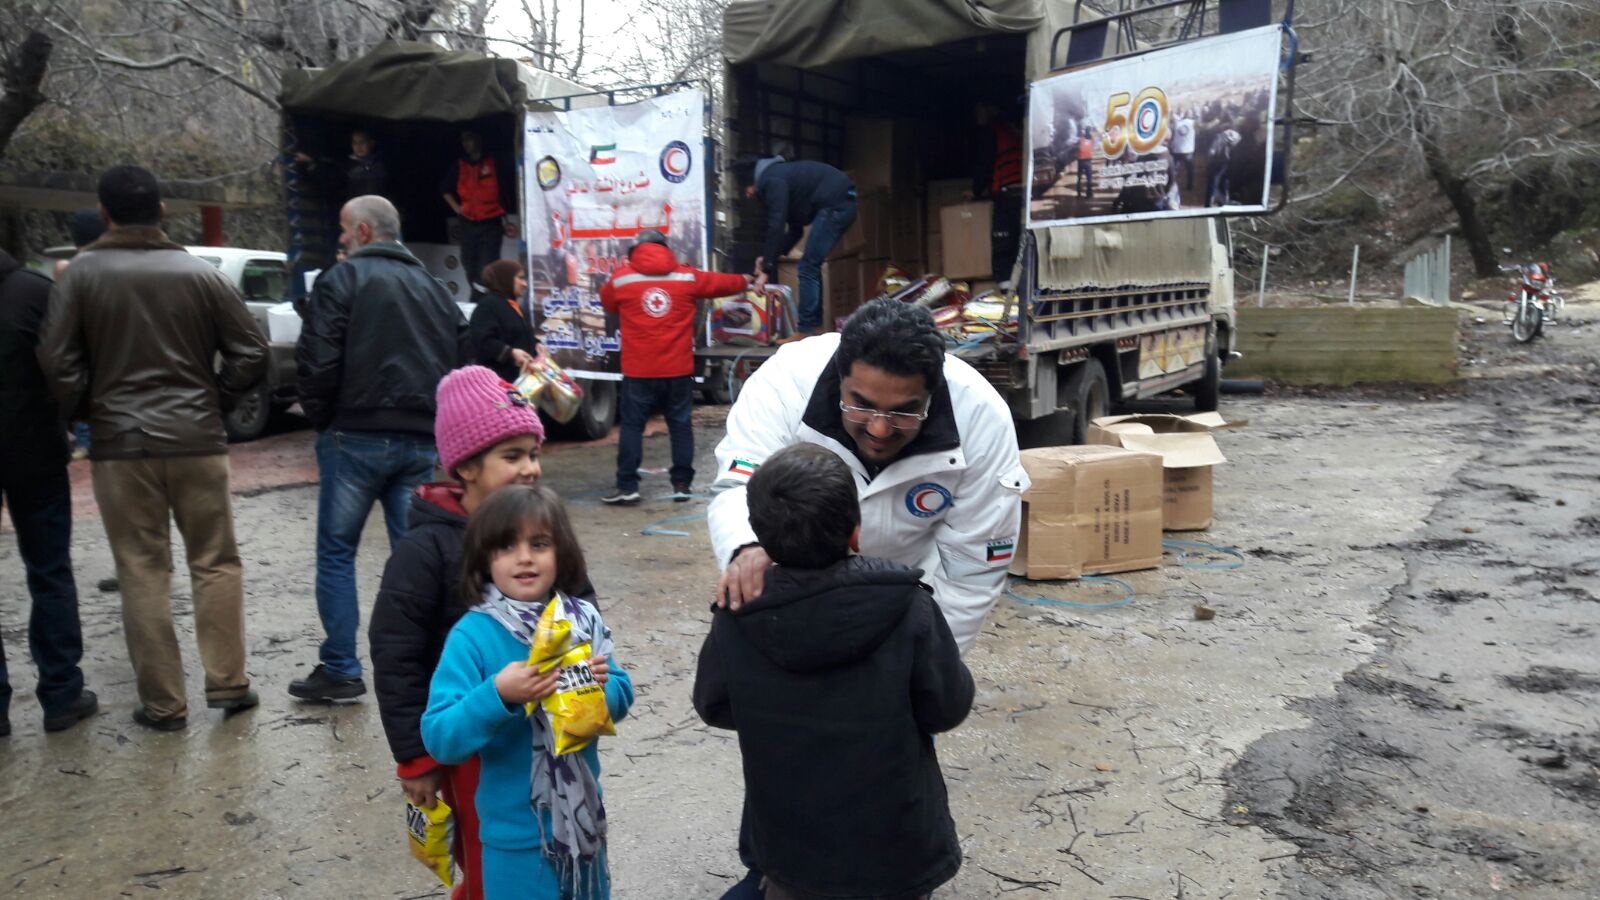 Teams of Kuwait Red Crescent Society delivered food and other necessities to Syrian refugee